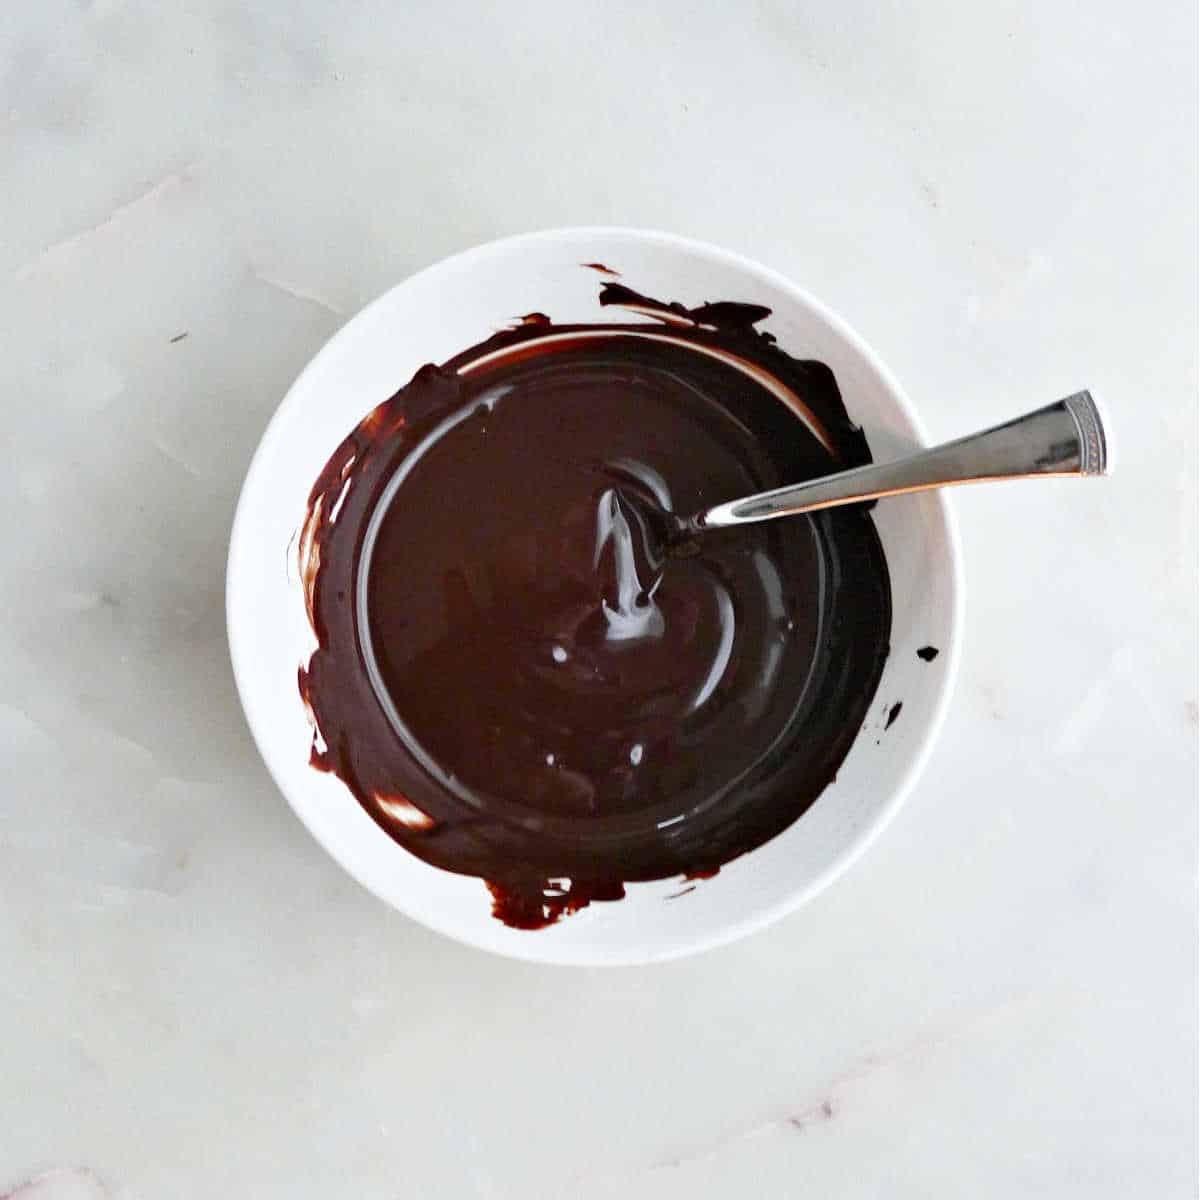 melted dark chocolate in a bowl with a spoon on a counter